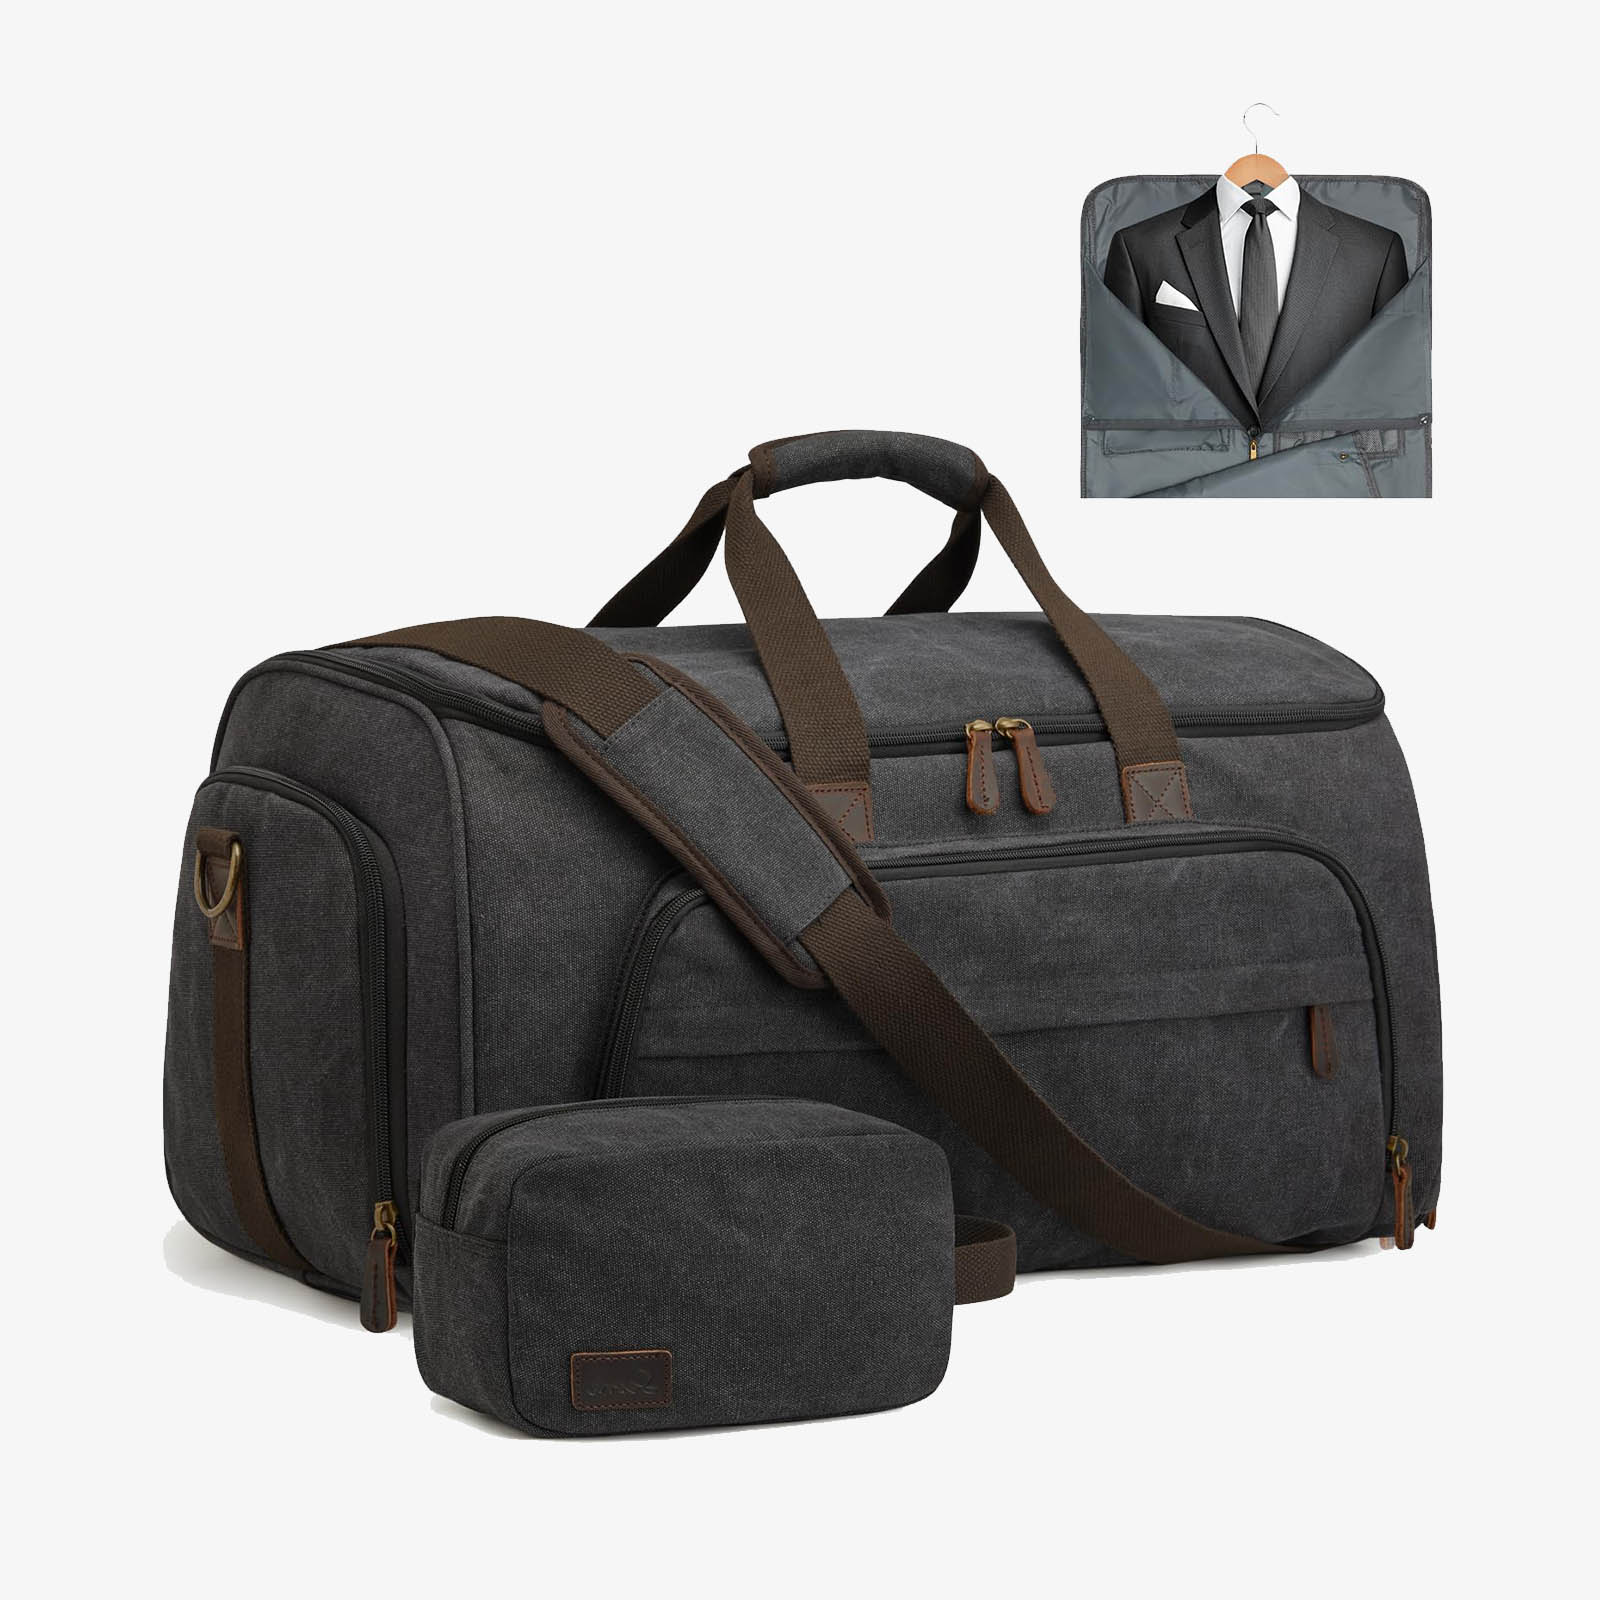 All-In-One Garment Travel Bag